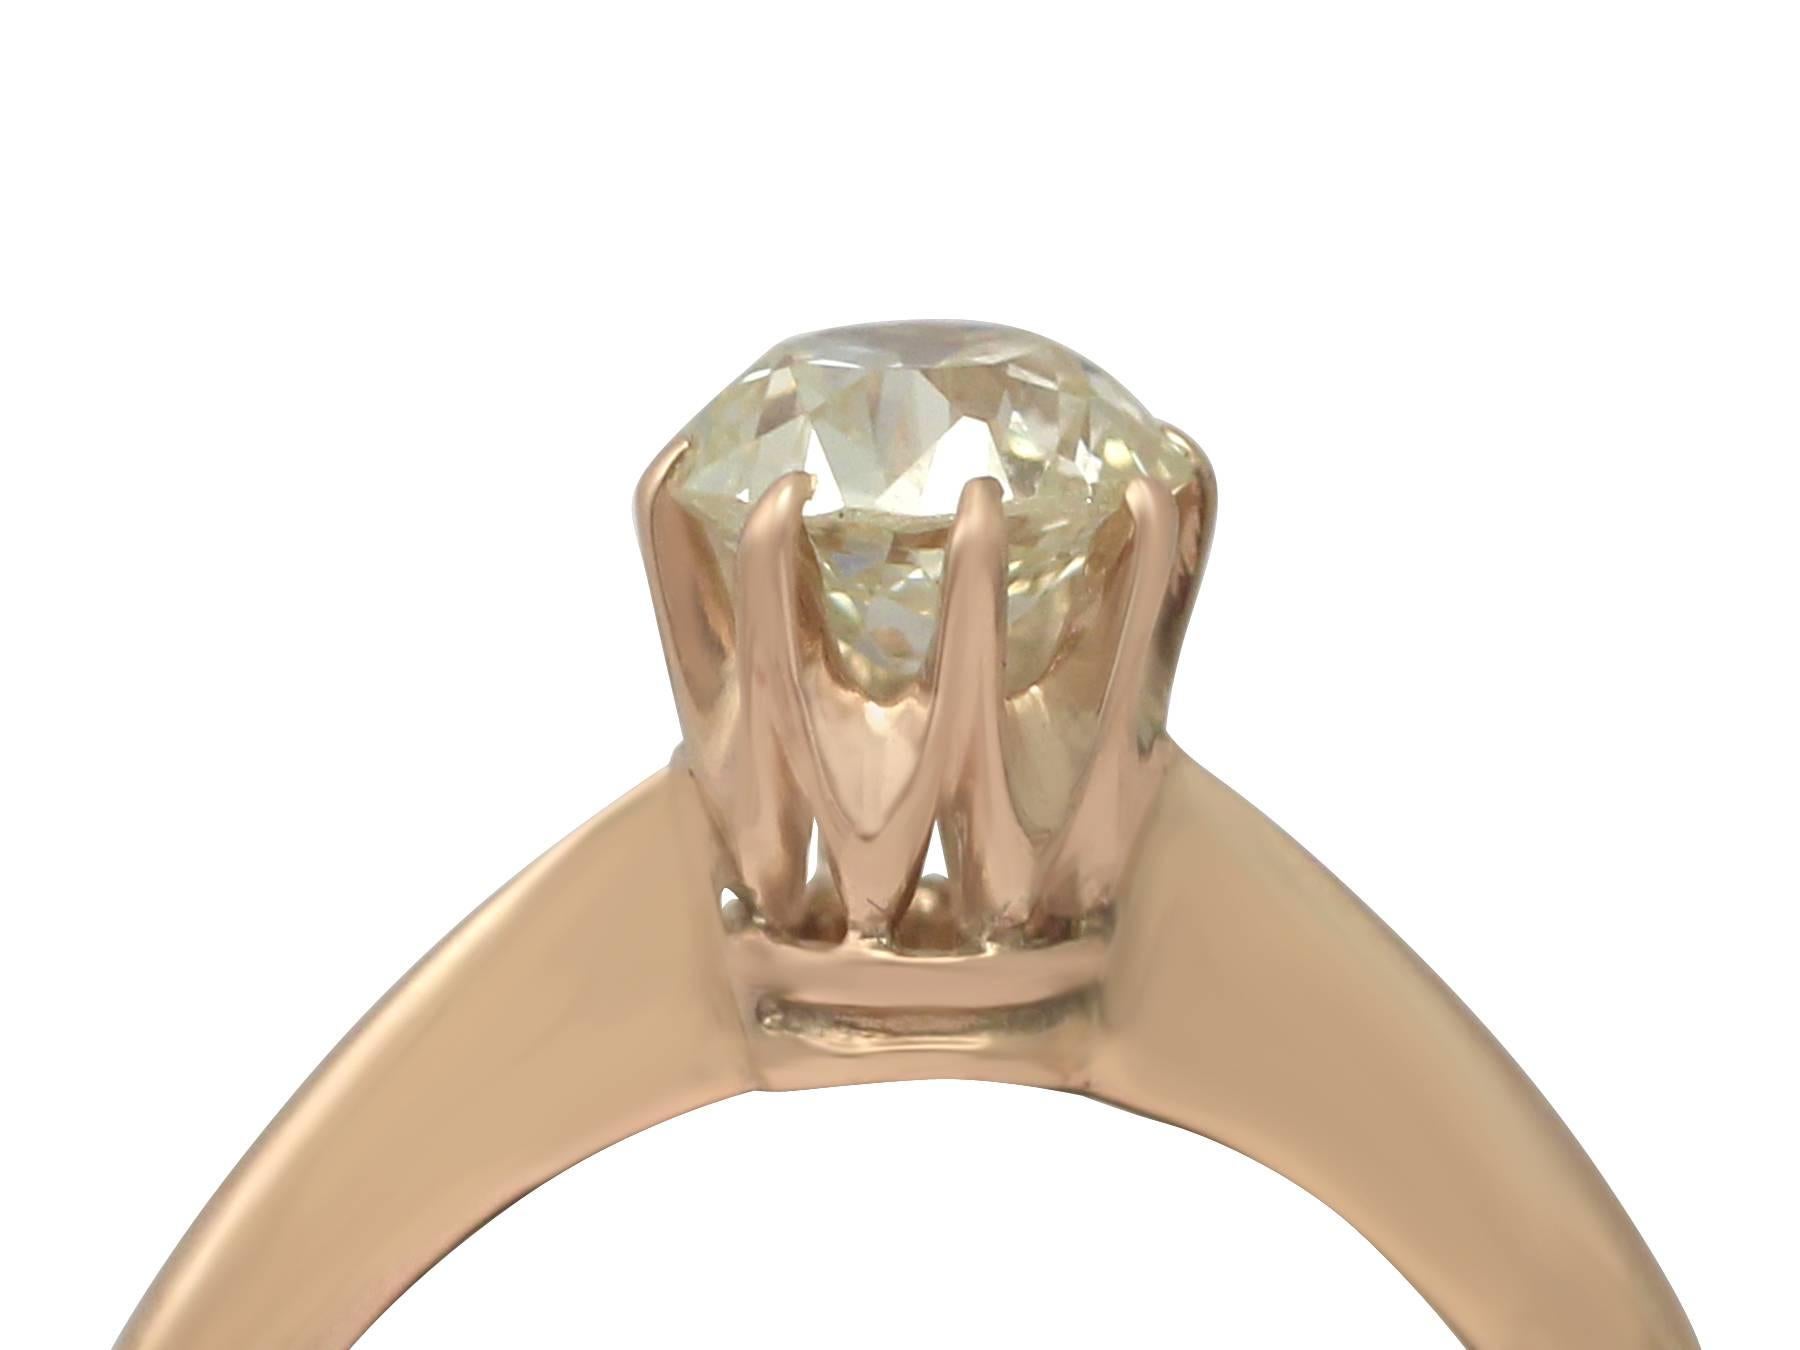 A fine and impressive antique 1.04 carat diamond and 10 karat rose gold solitaire ring; part of our diverse antique engagement ring collections

This fine and impressive 1.04 ct diamond ring has been crafted in 10k rose gold.

The pierced